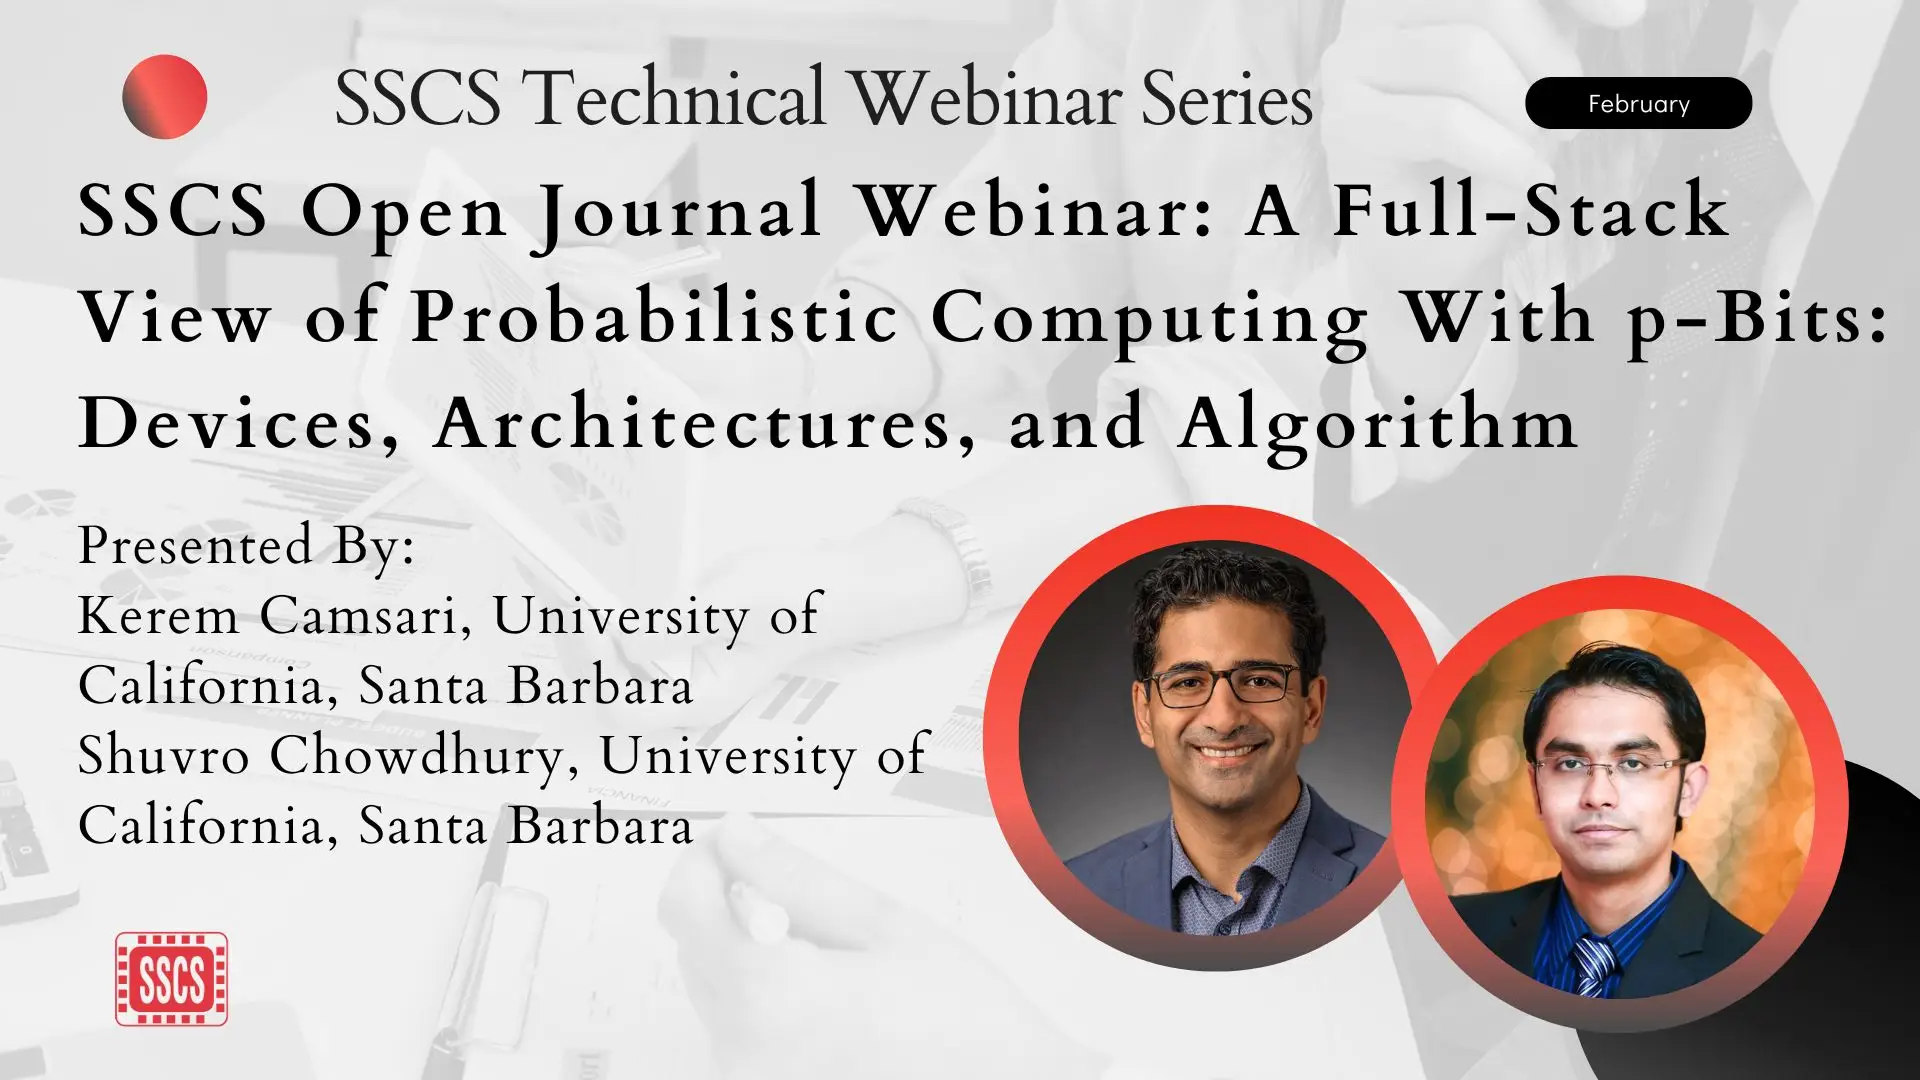 SSCS Open Journal Webinar: A Full-Stack View of Probabilistic Computing With p-Bits: Devices, Architectures, and Algorithms Slides